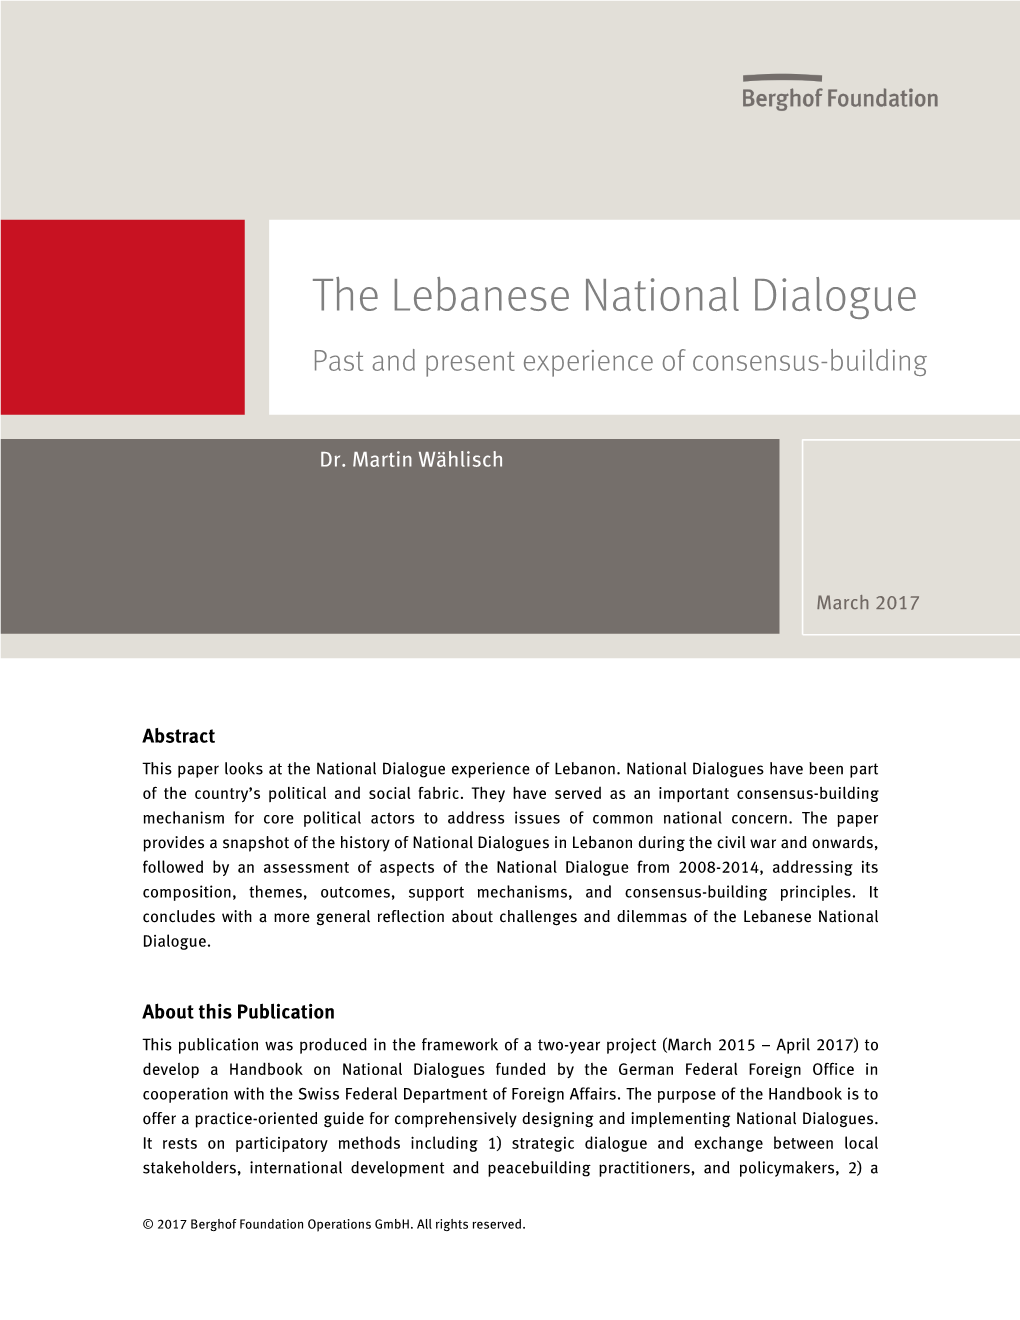 The Lebanese National Dialogue Past and Present Experience of Consensus-Building